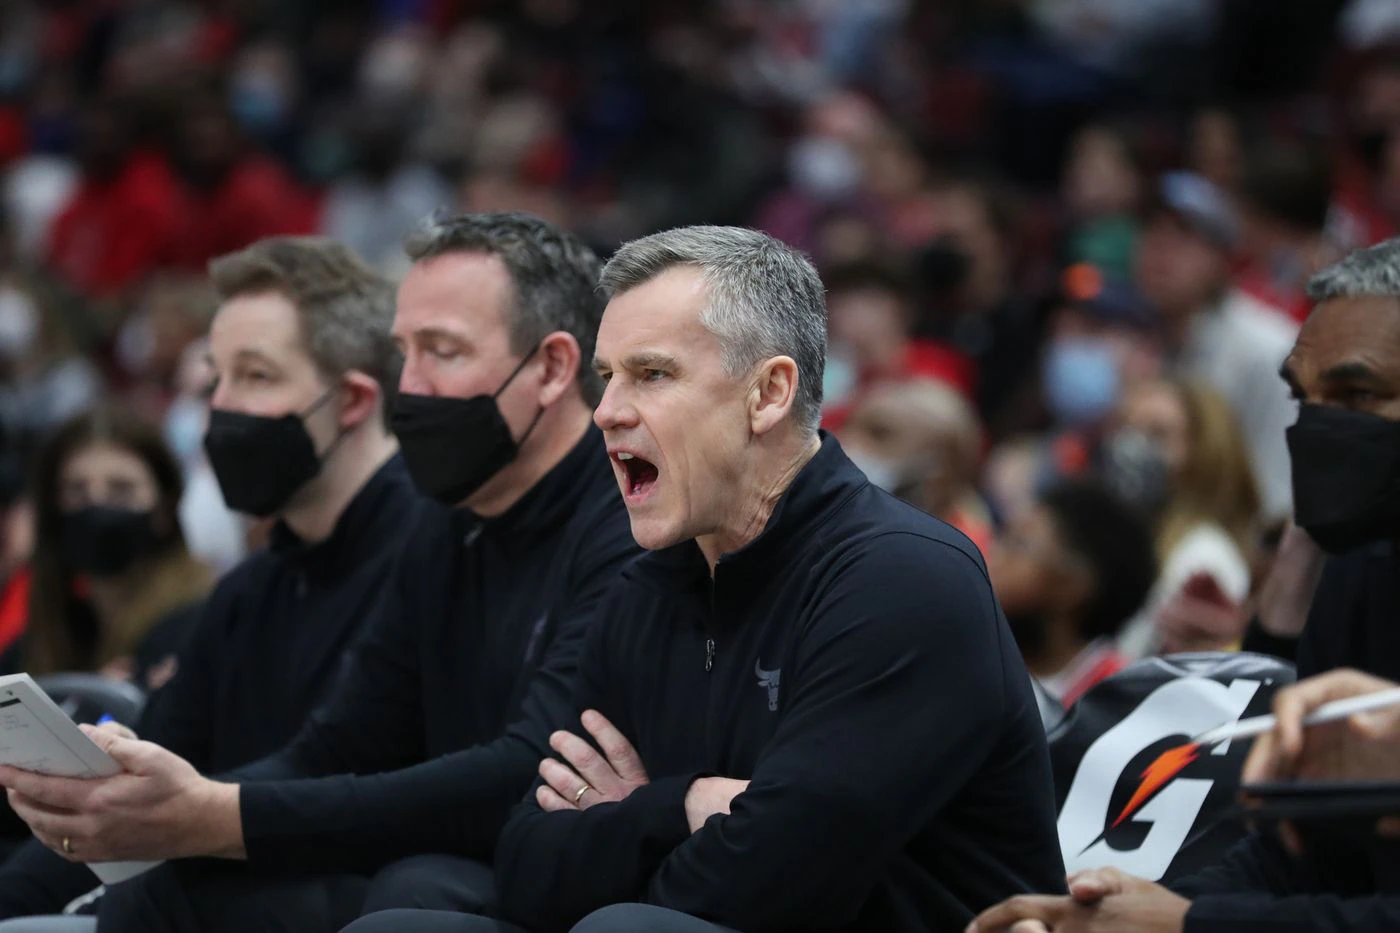 Bulls coach Billy Donovan yells from the bench as his team plays the Magic in the first quarter.